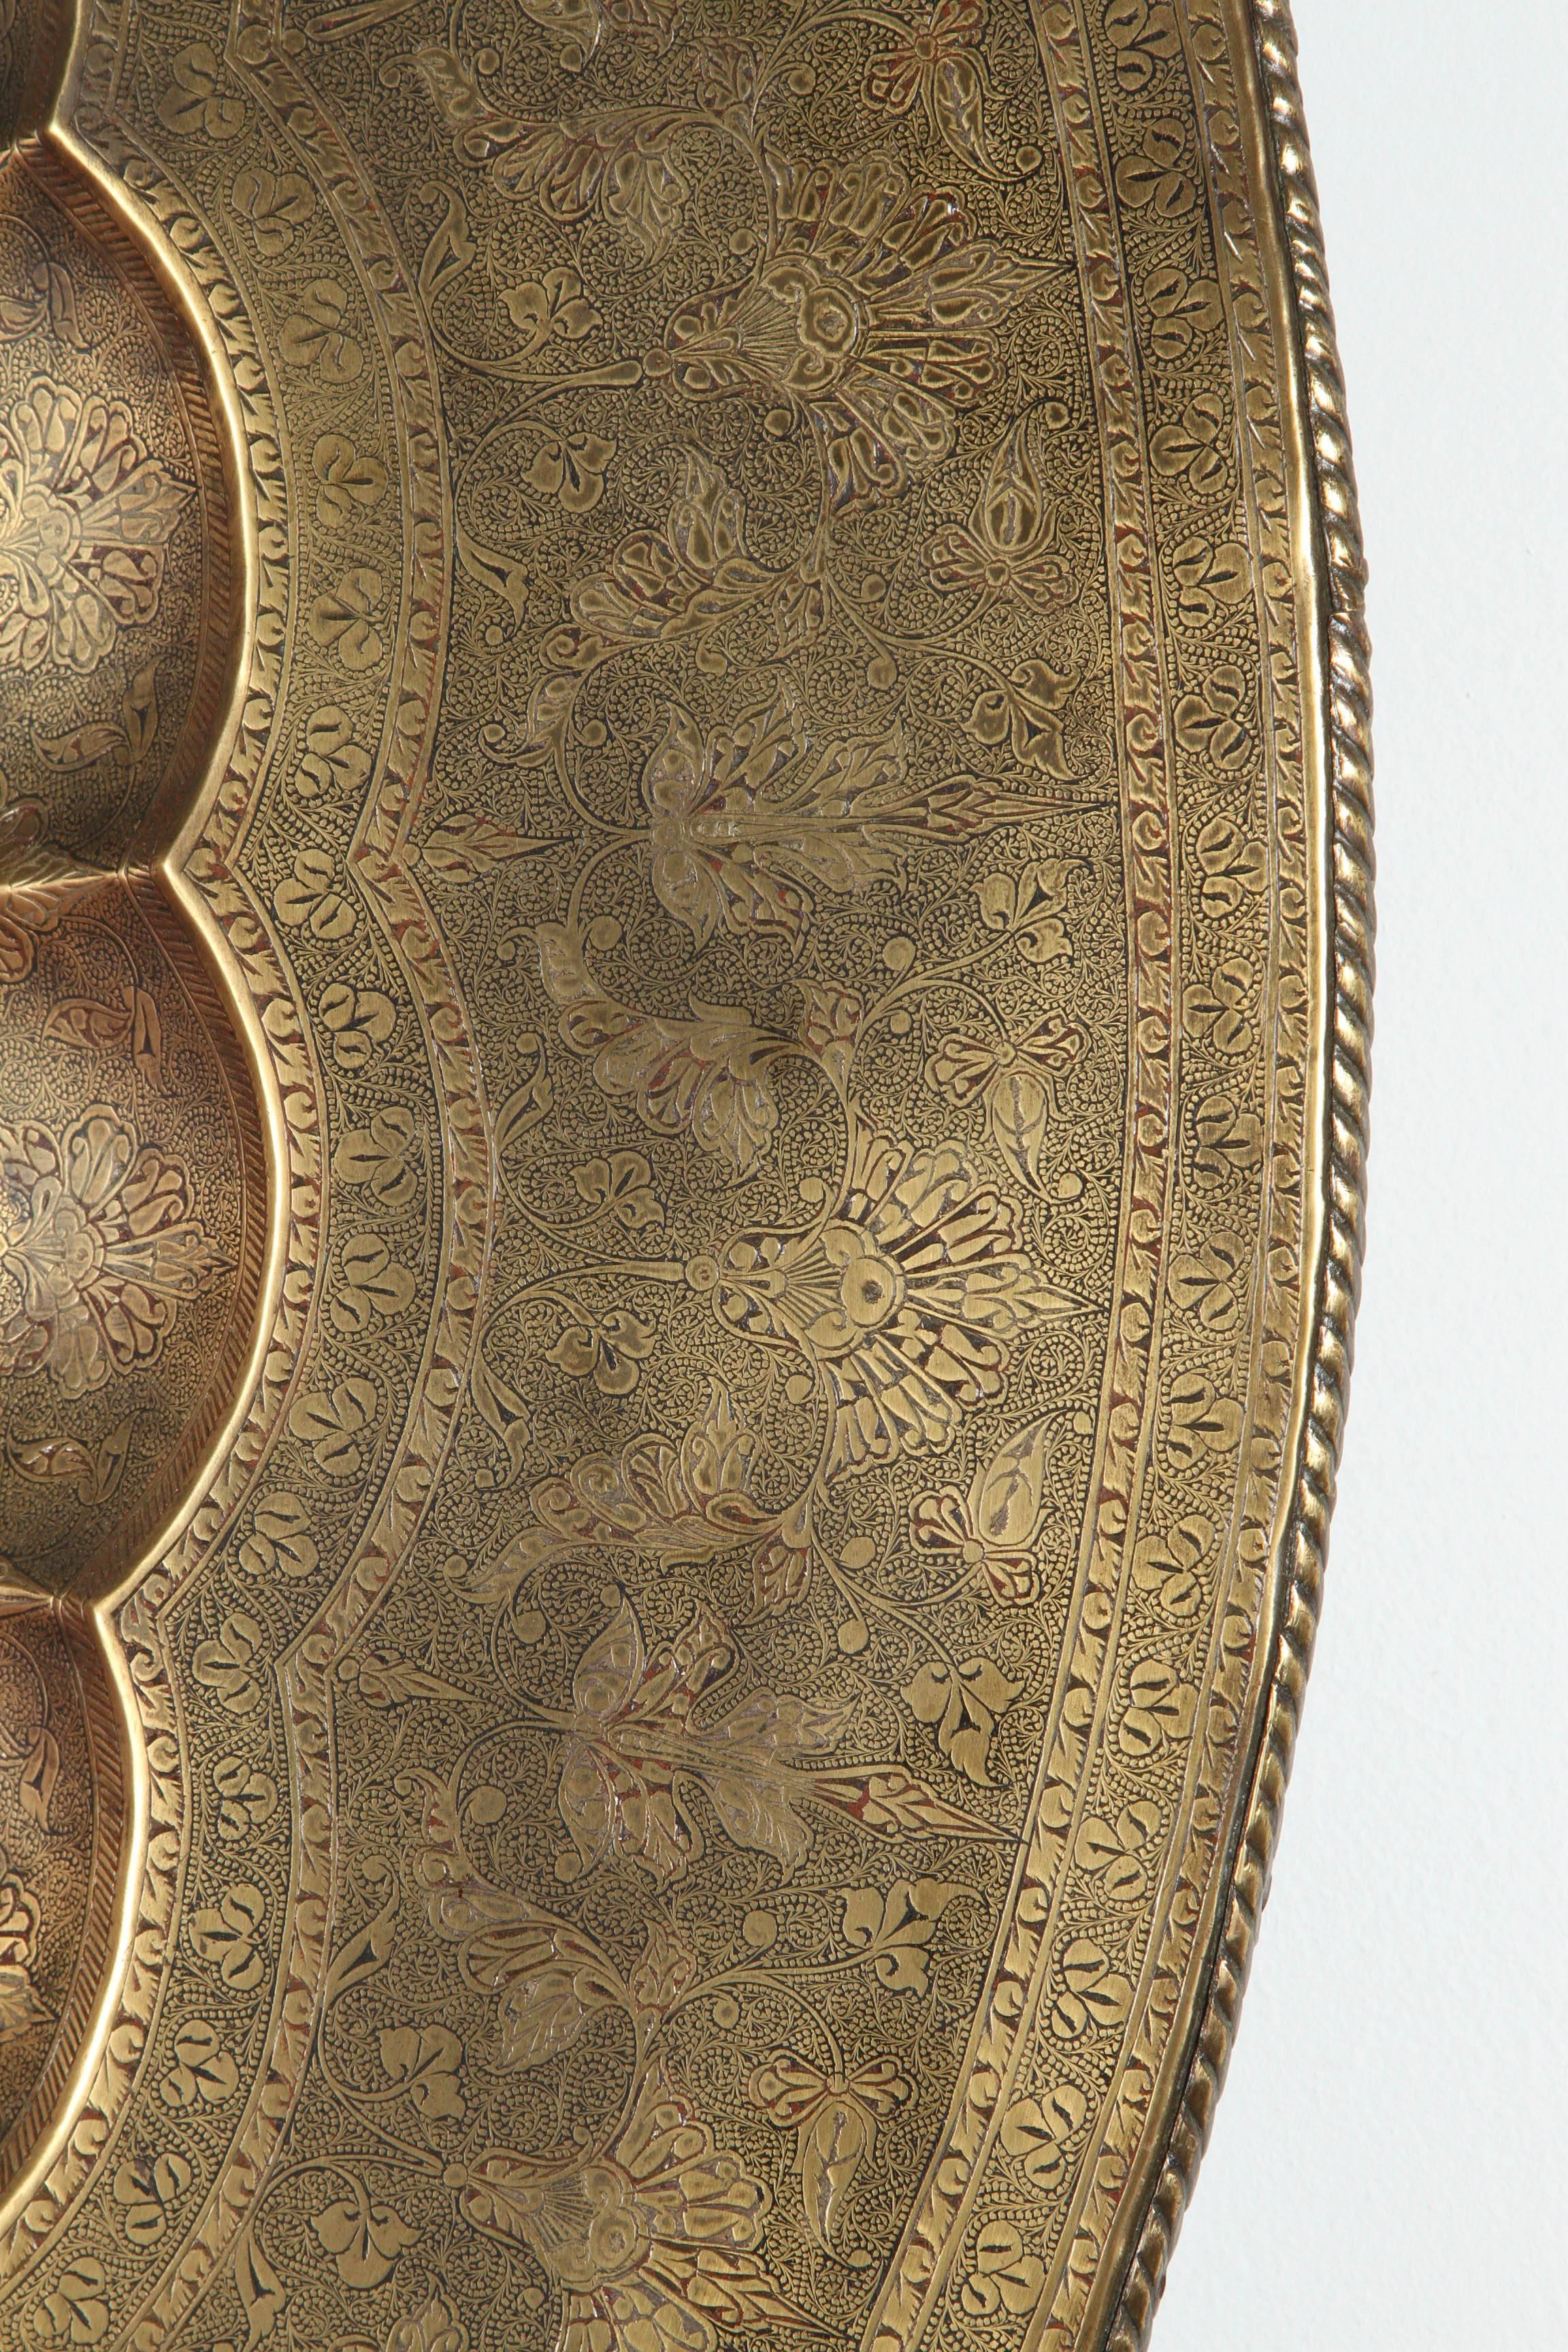 20th Century Monumental Mughal-Indian Brass Hanging Tray Platter 47 Inches Diameter